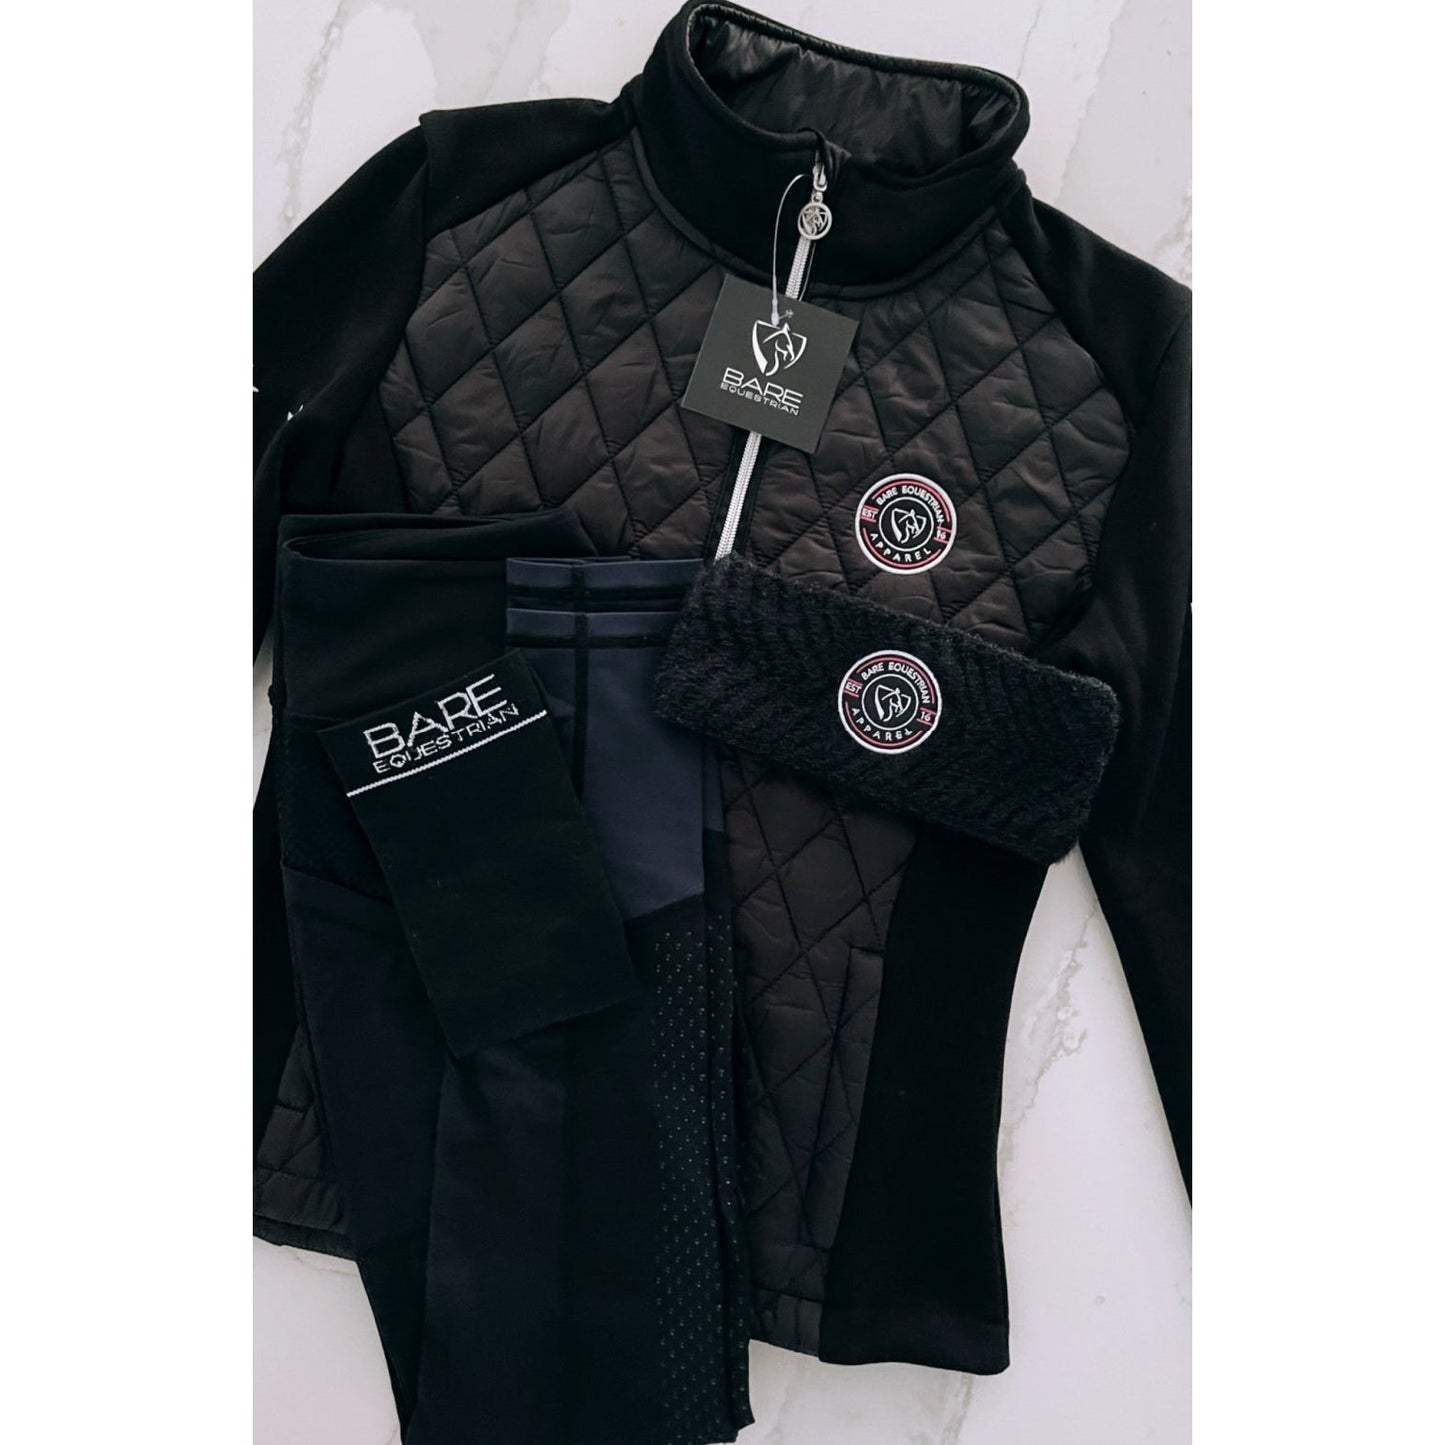 BARE Equestrian Mia Jacket-Trailrace Equestrian Outfitters-The Equestrian